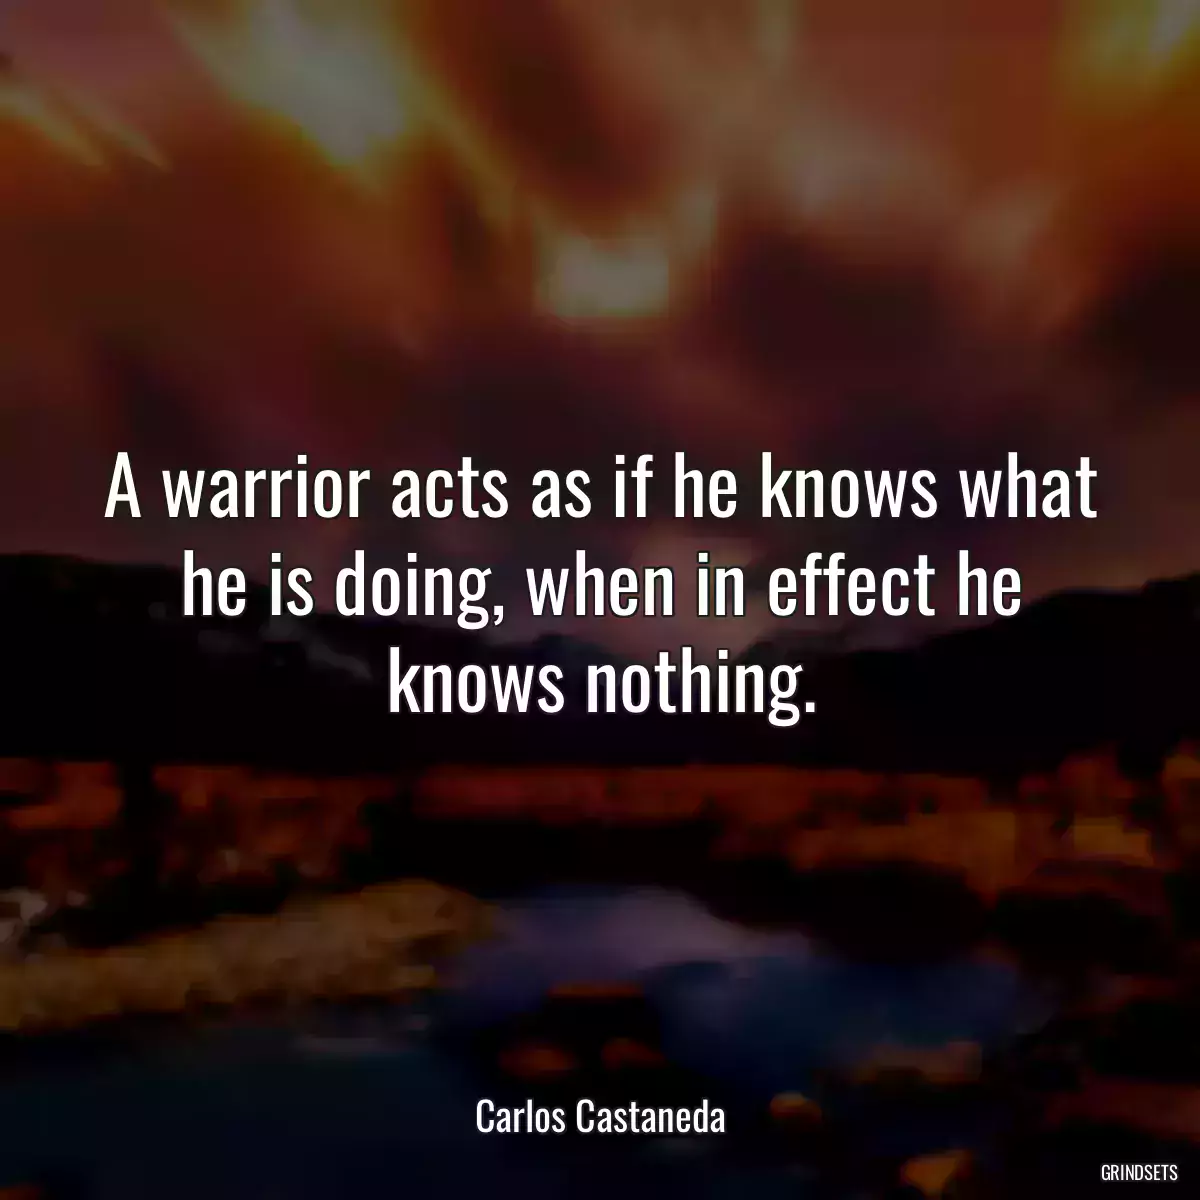 A warrior acts as if he knows what he is doing, when in effect he knows nothing.